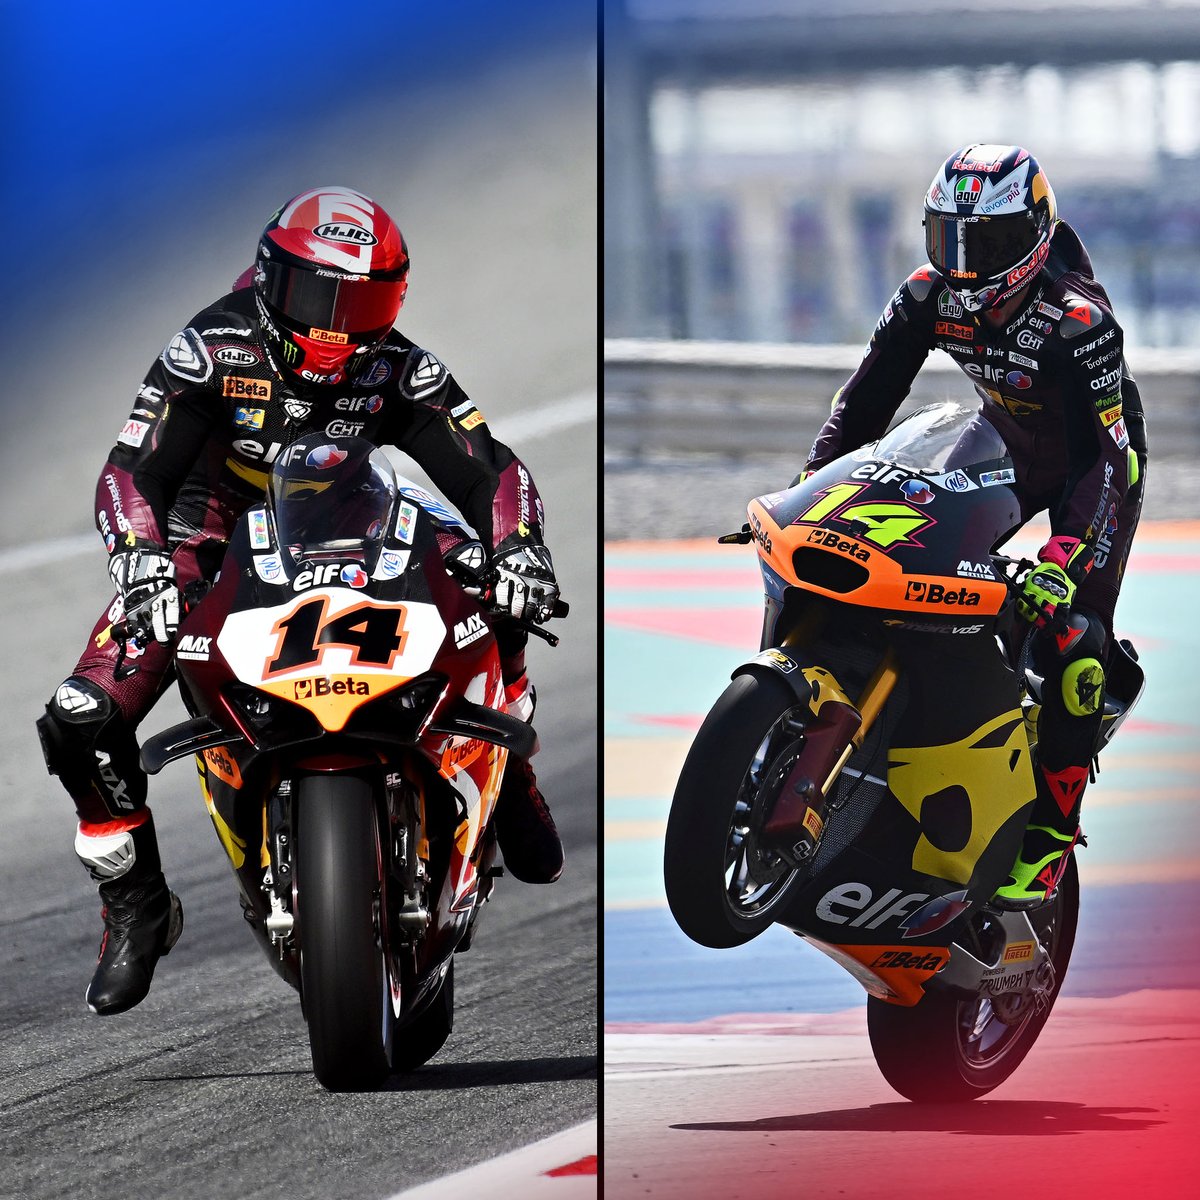 A very busy weekend of racing awaits @ElfMarcVDS Racing Team, with the #WorldSBK #CatalanWorldSBK for @SamLowes_22 and #Moto2 #PortugueseGP for @TonyArbolino! Let’s go team! 🔥 #ELF